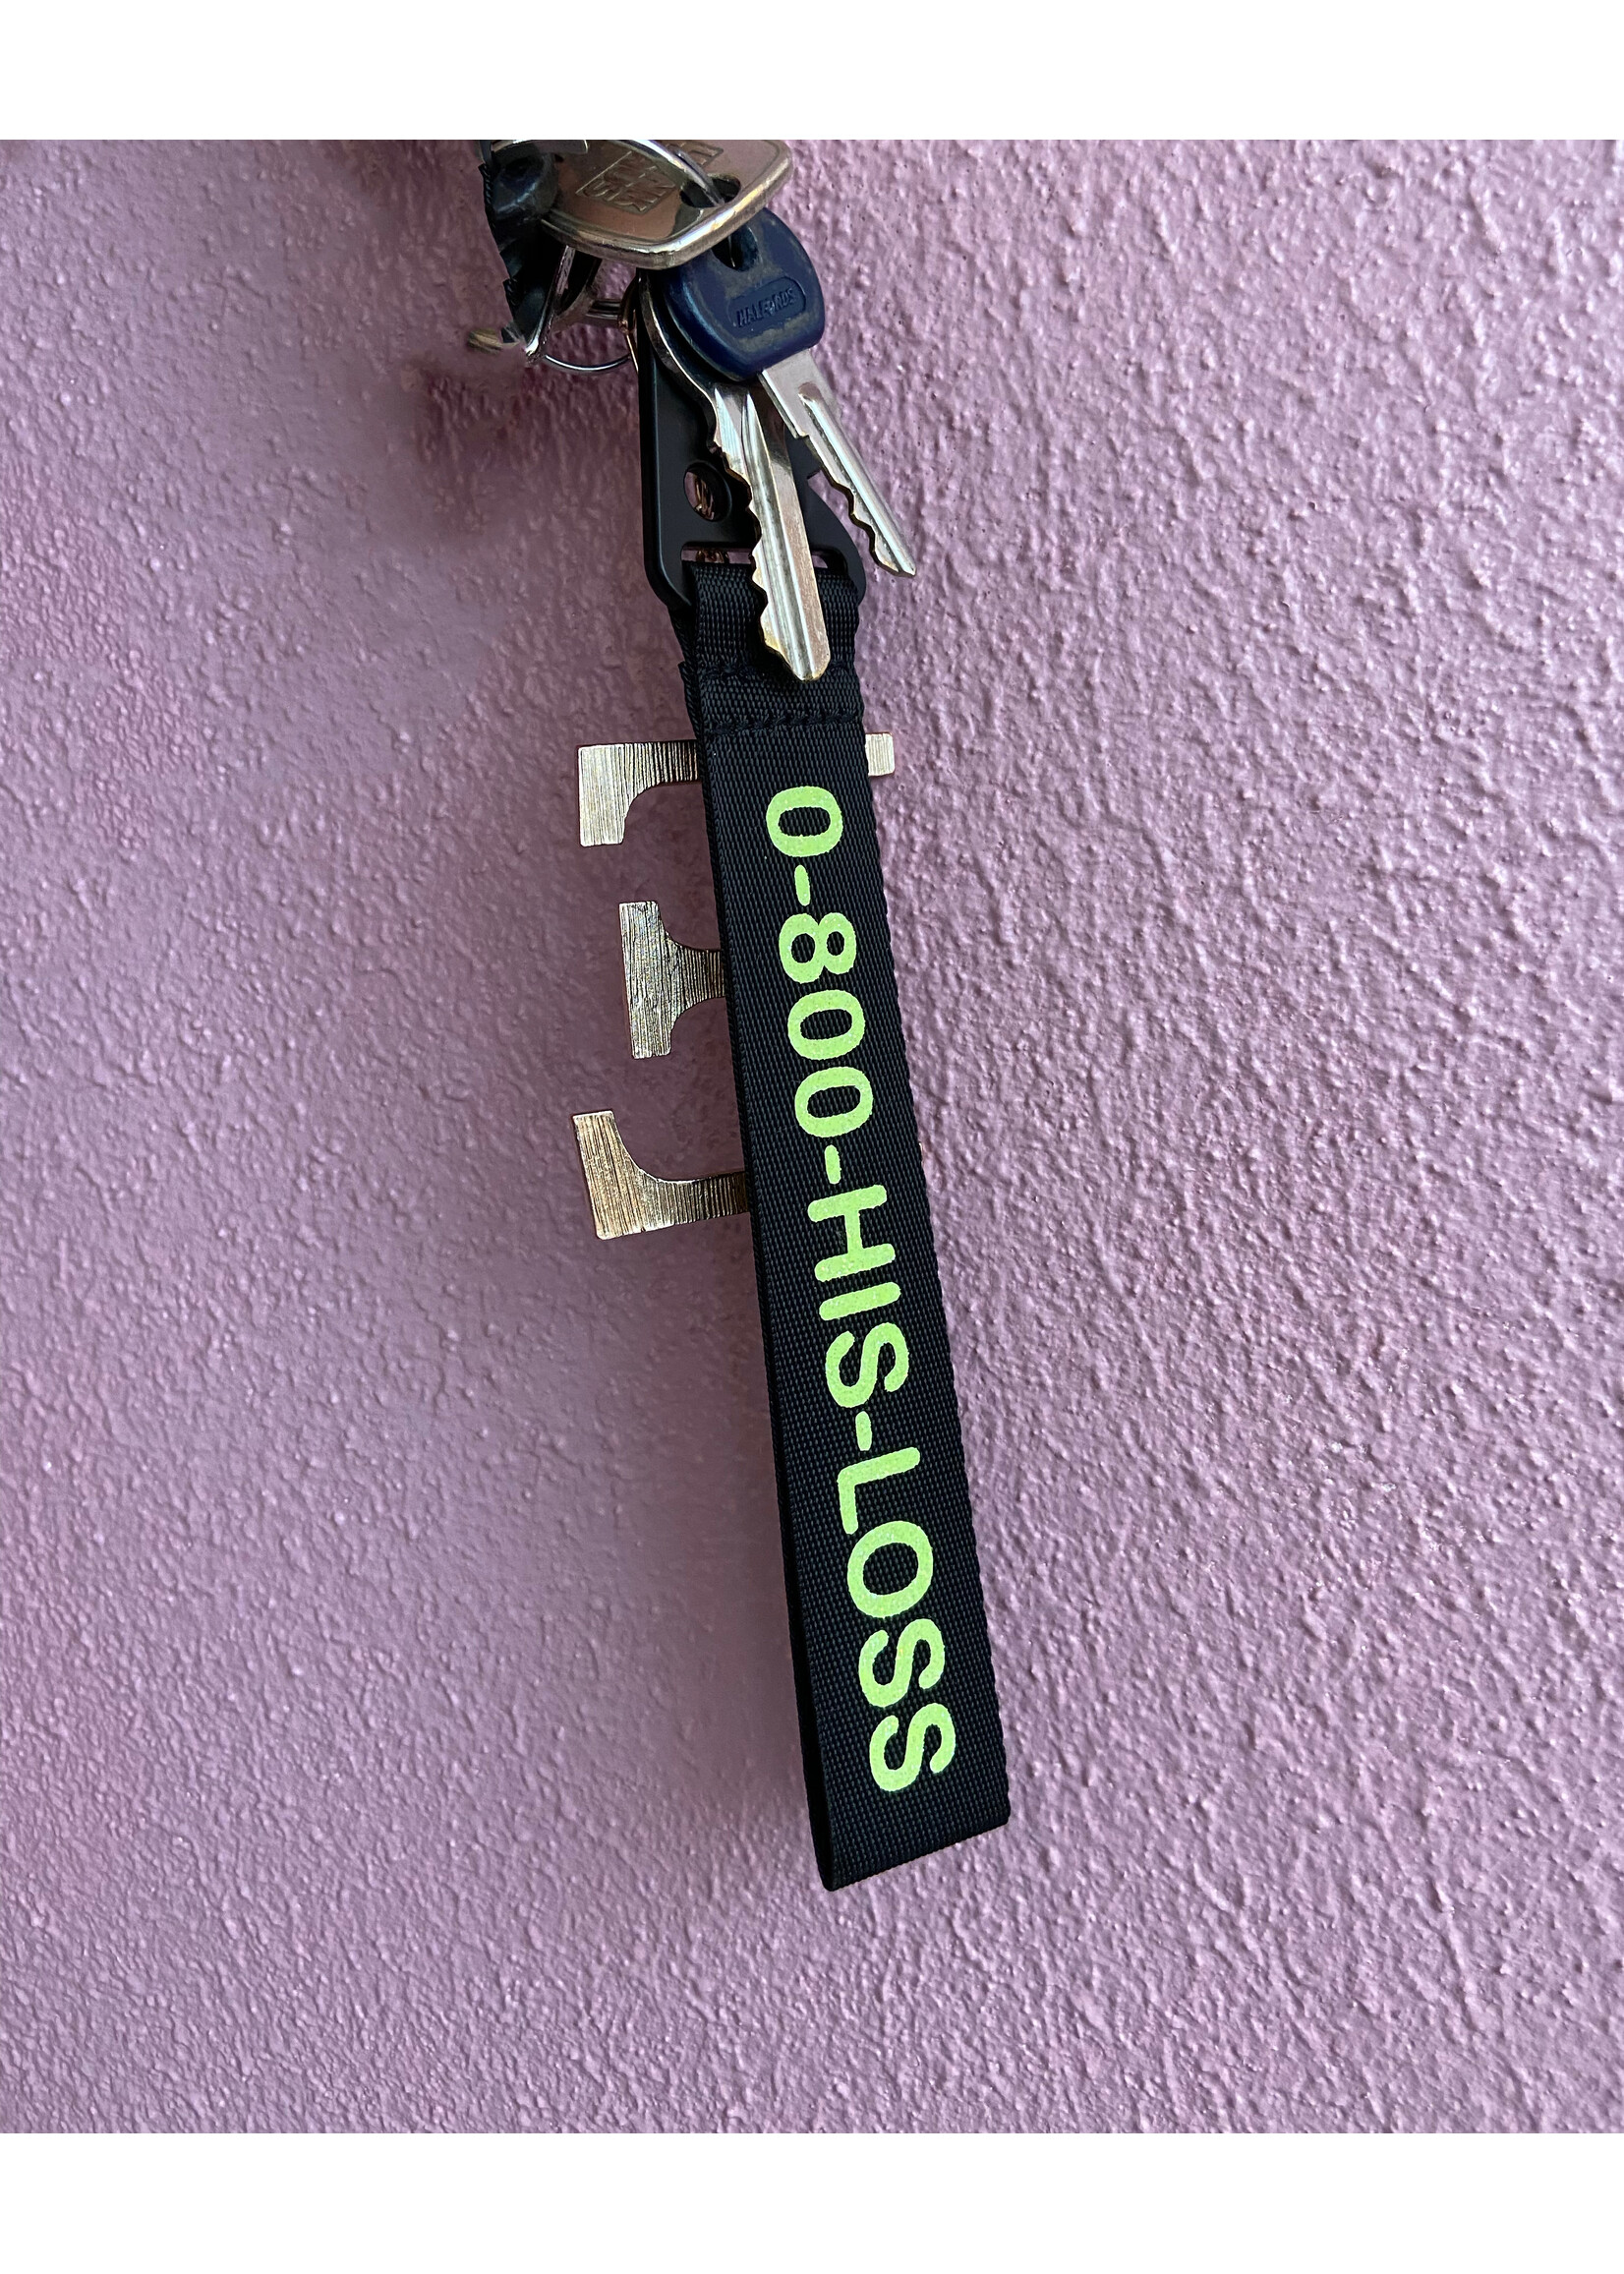 YOU ARE SPECIAL "0-800-HIS-LOSS" Black Keychain